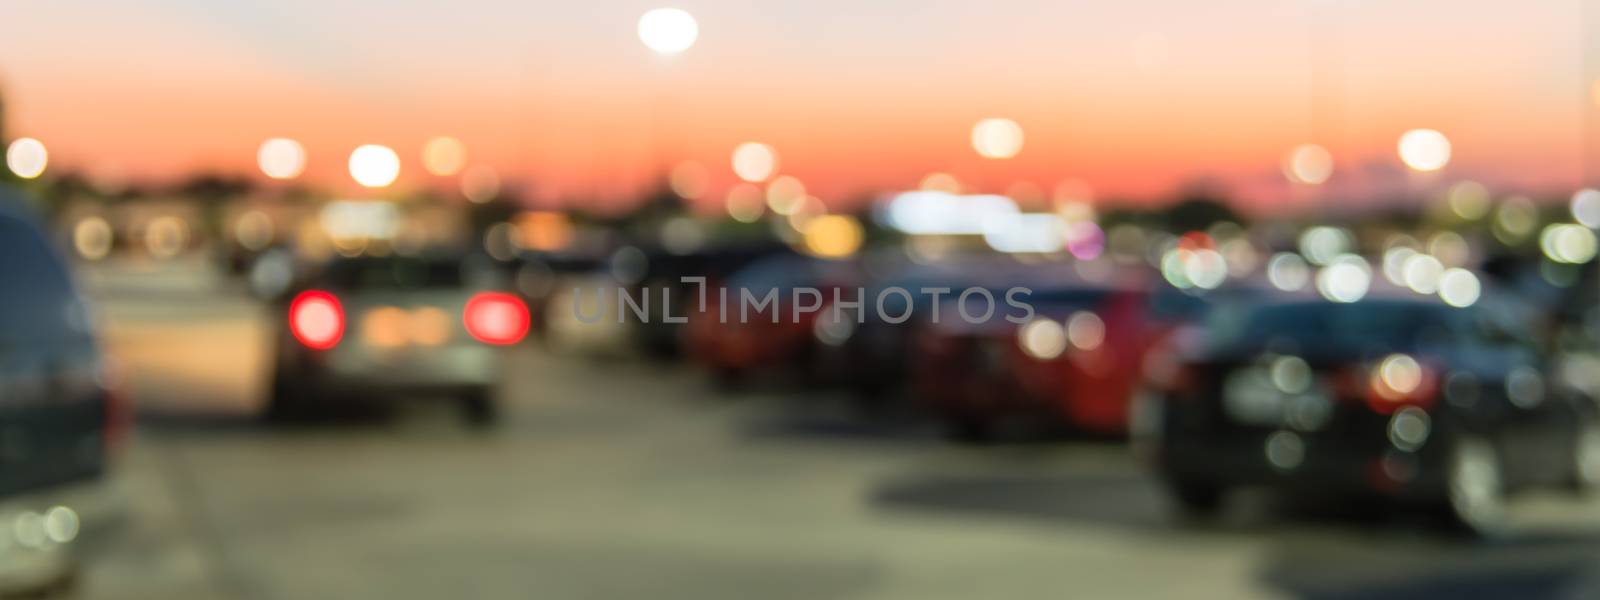 Panorama view abstract blurred parking lot of modern shopping center in Houston, Texas, USA. Exterior mall complex with row of cars in outdoor uncovered parking, bokeh light poles in background